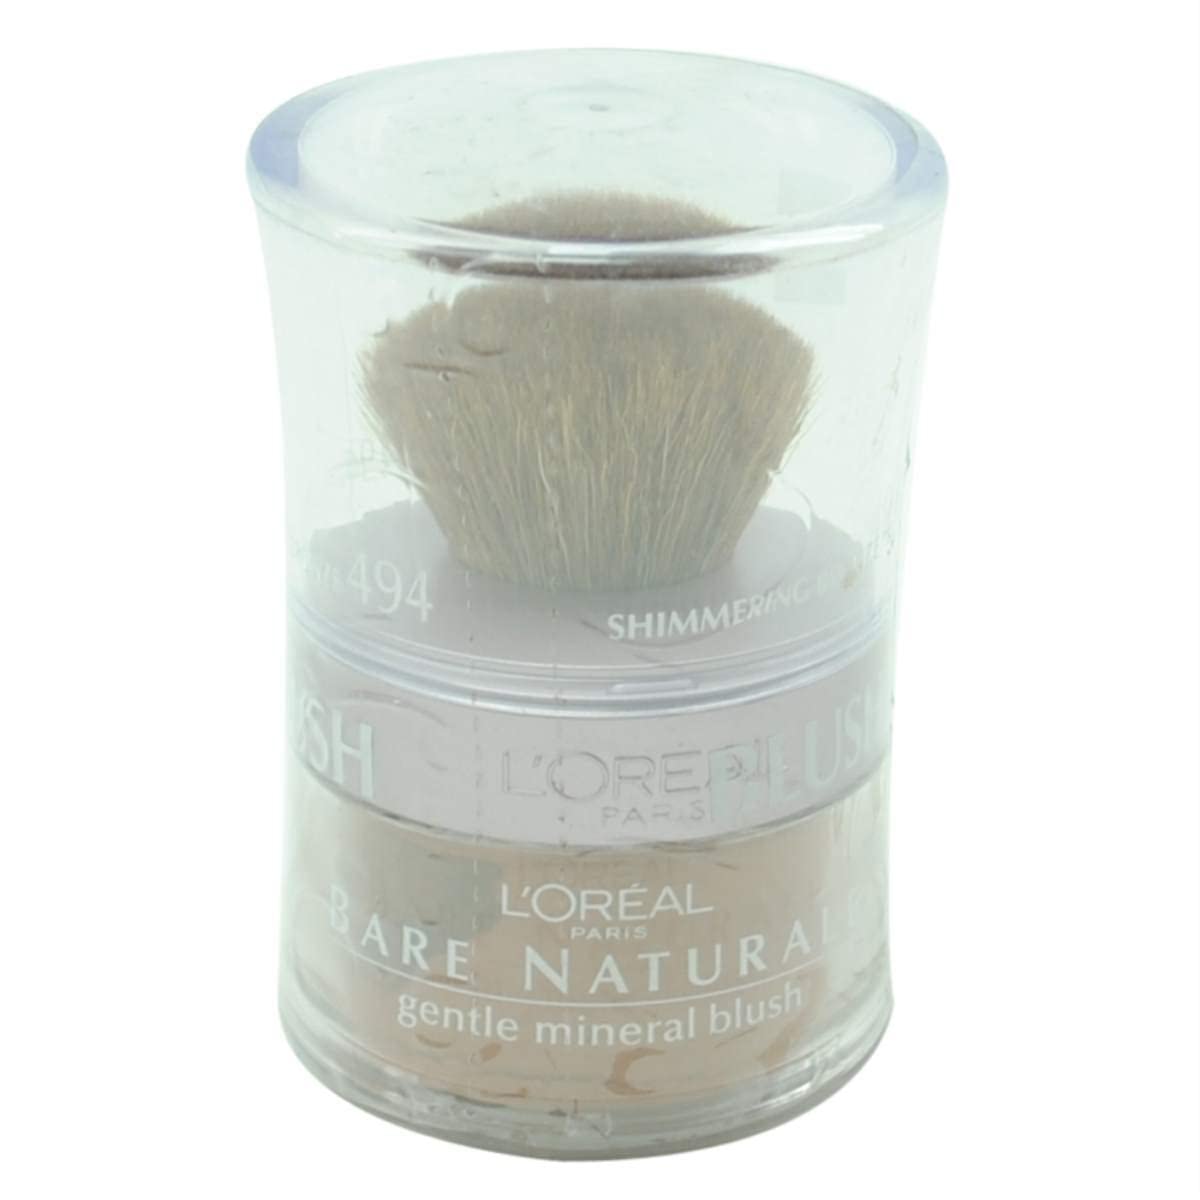 L'Oreal Bare Naturale Gentle Mineral Blush - Powder with Brush - # 494 - Shimmering Bronze